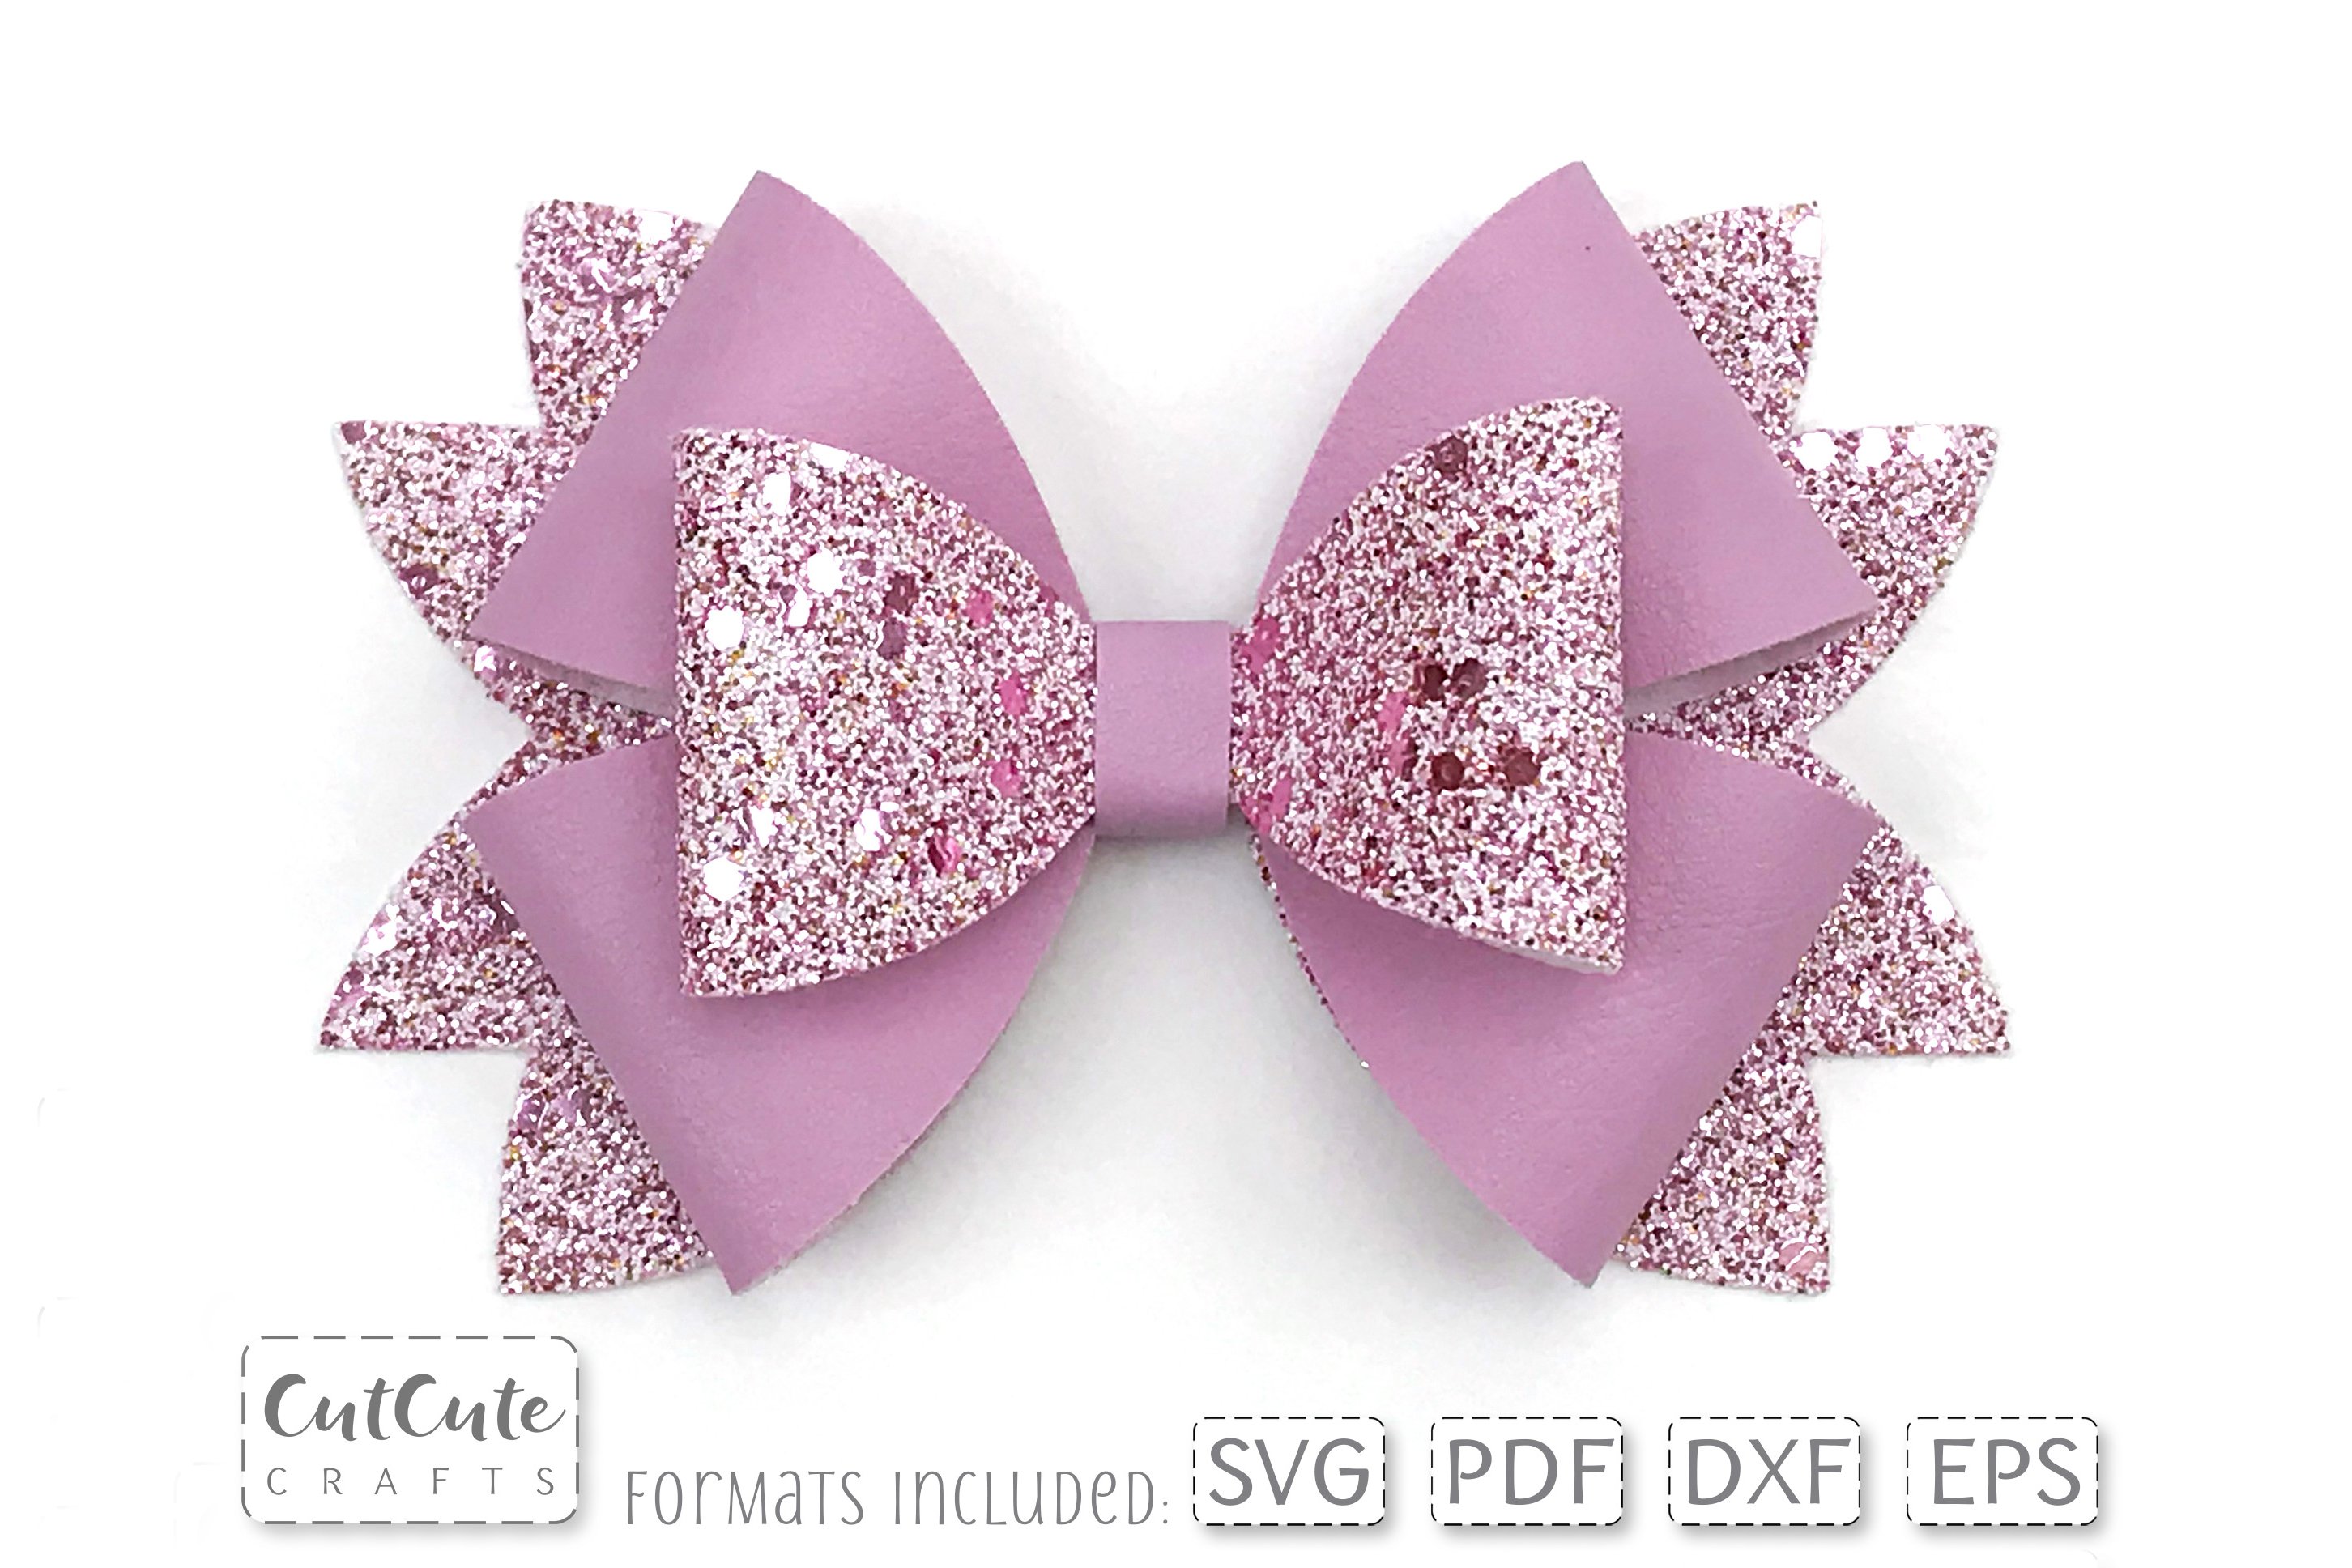 So cute bows for different options.